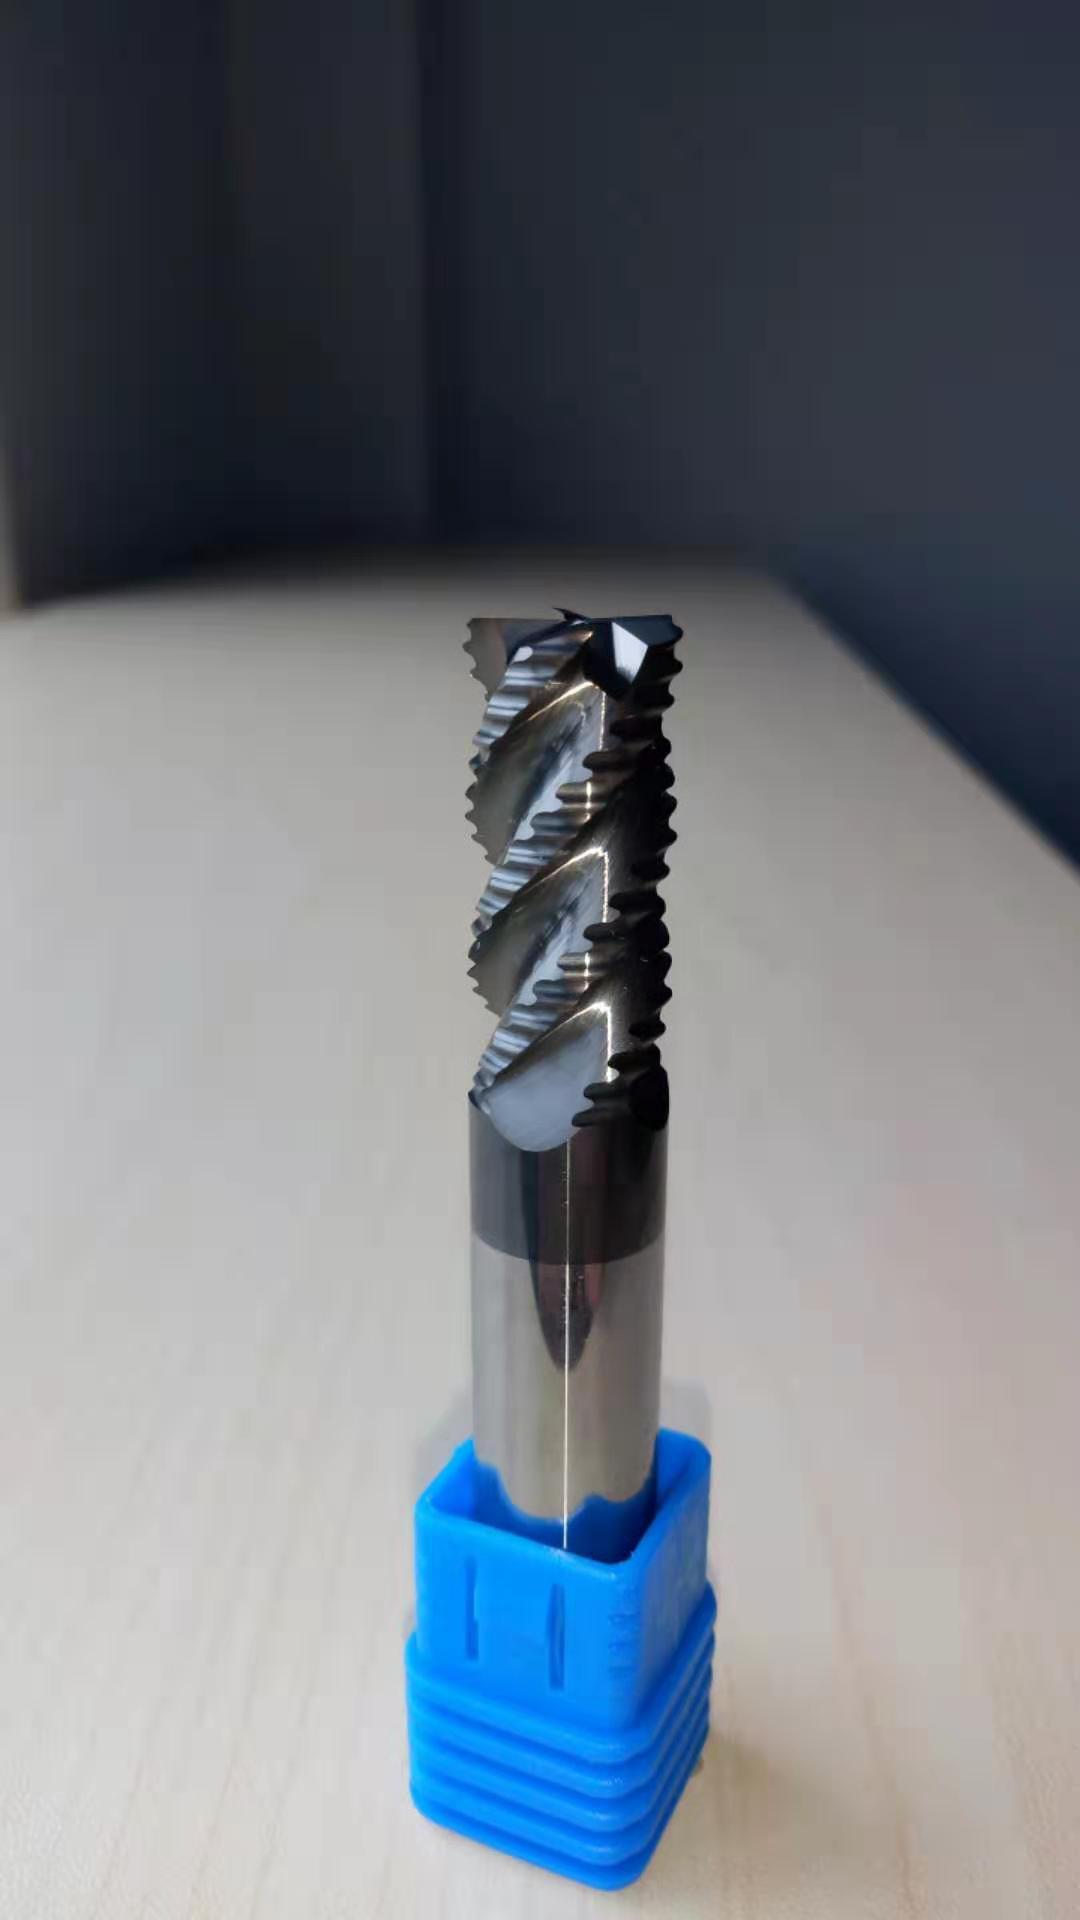 carbide end mills cutting tools